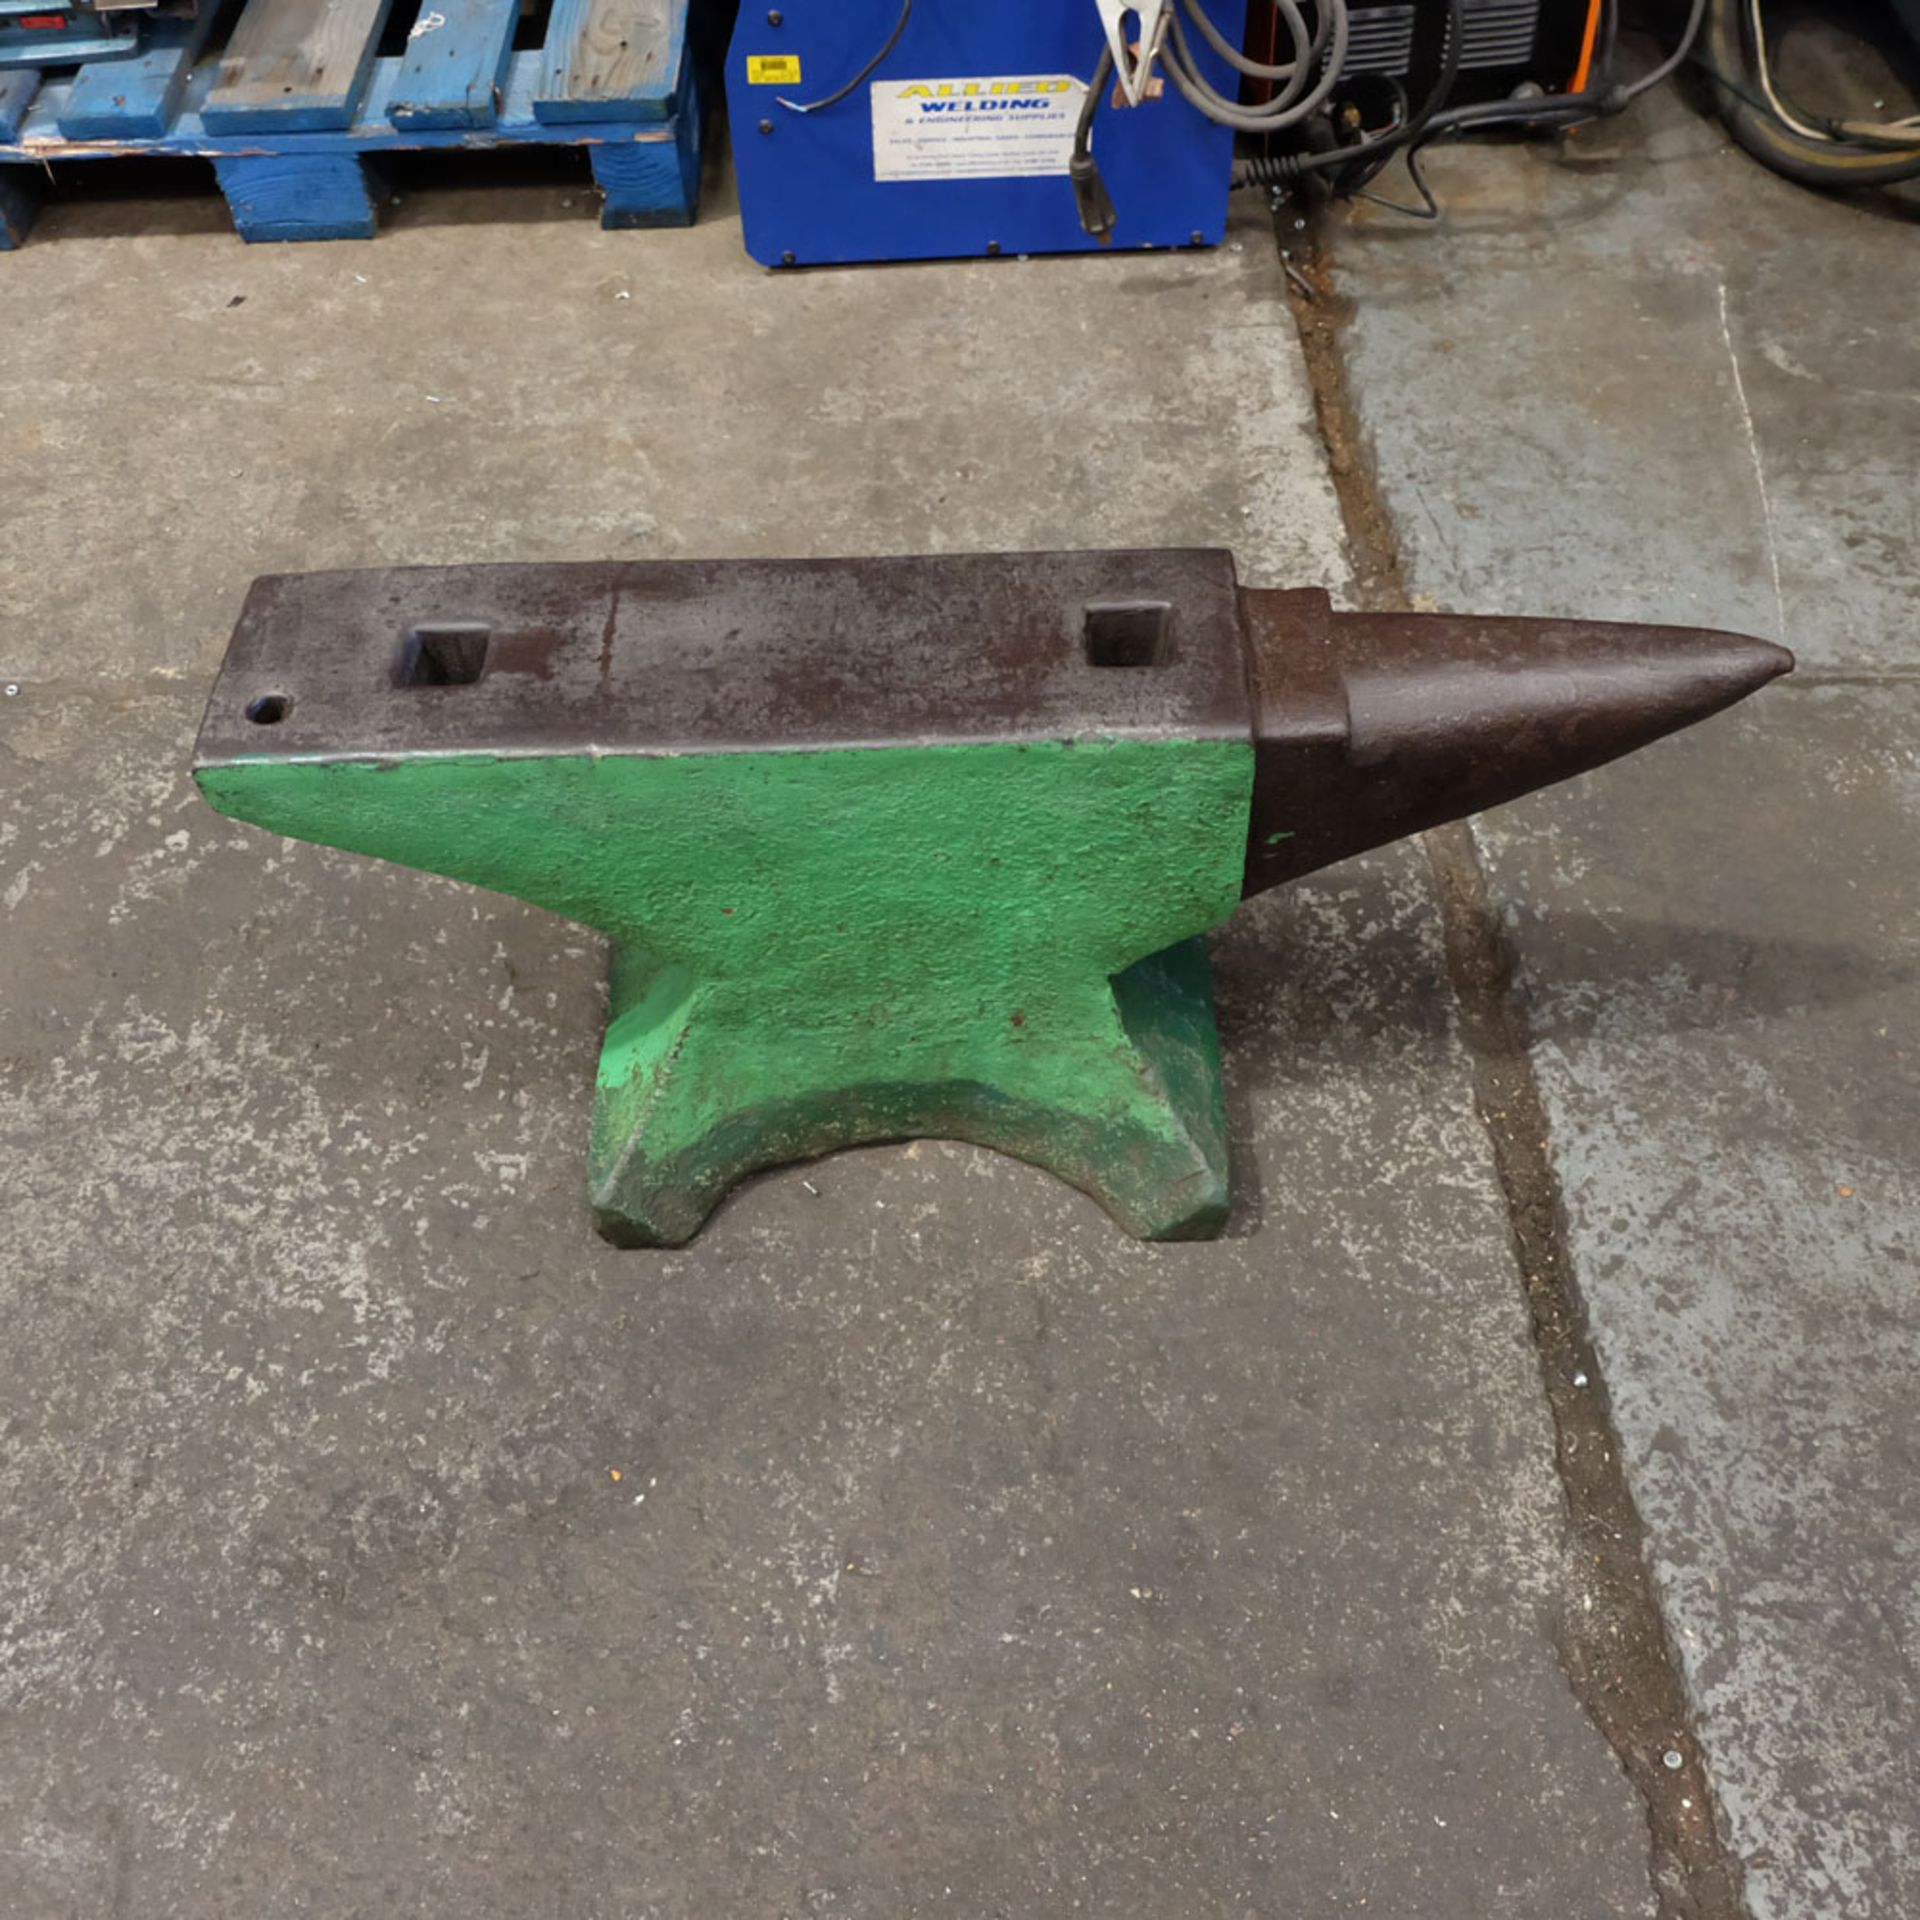 Blacksmiths Anvil. Total Length 35". Working Height 14". Flat Surface Area 22" x 6". Horn Length 12"